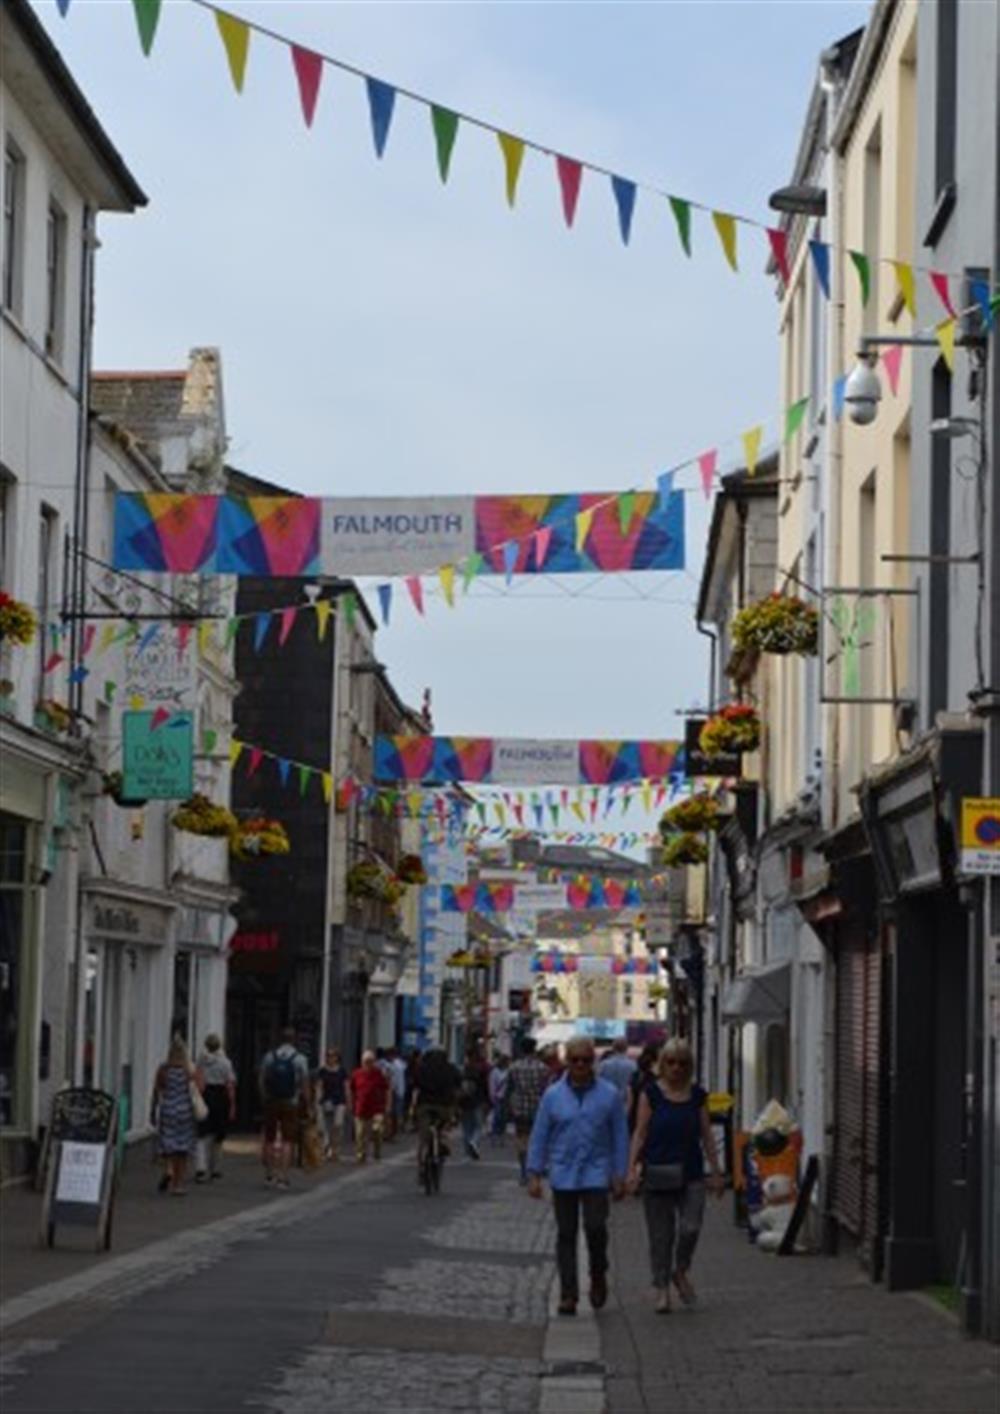 Falmouth town has an array of shops, plus a range of restaurants, cafes and art galleries